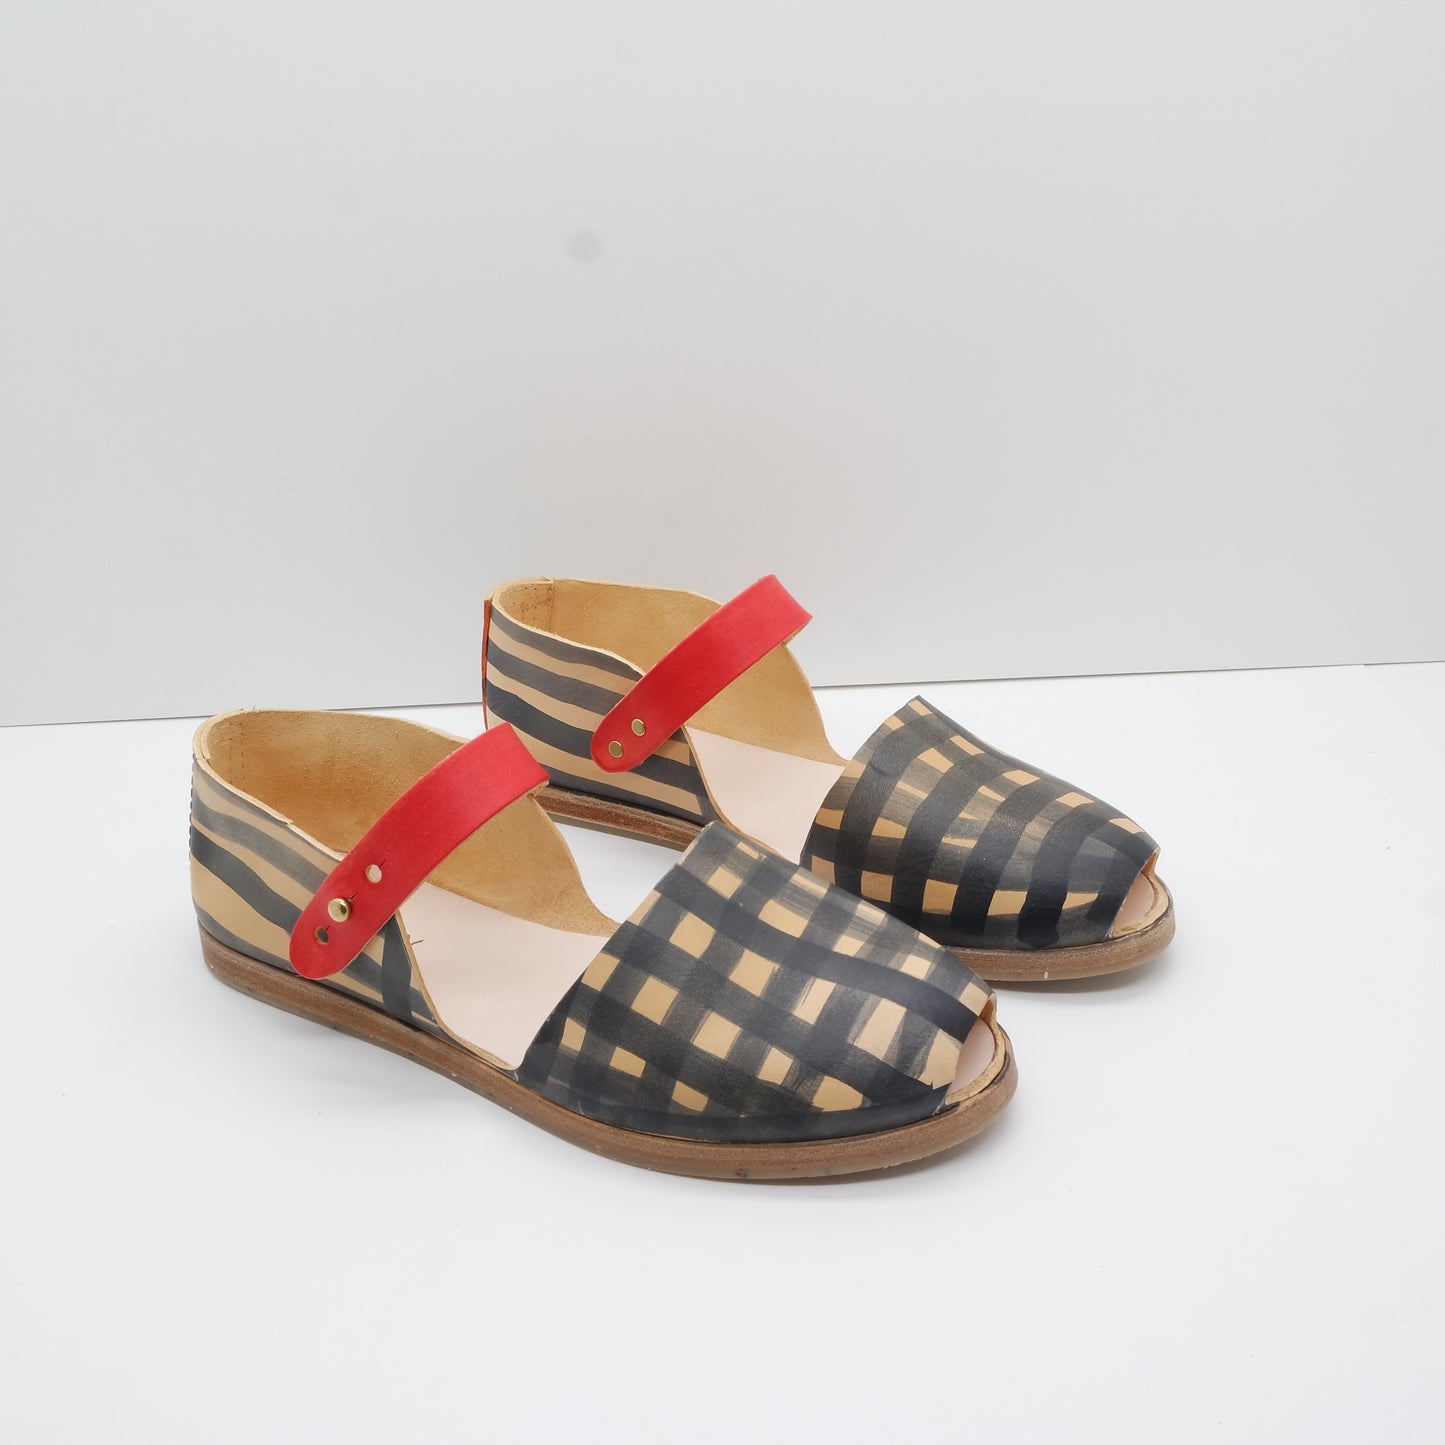 THE CATU. MIEL W BLACK GINGHAM AND RED STRAP